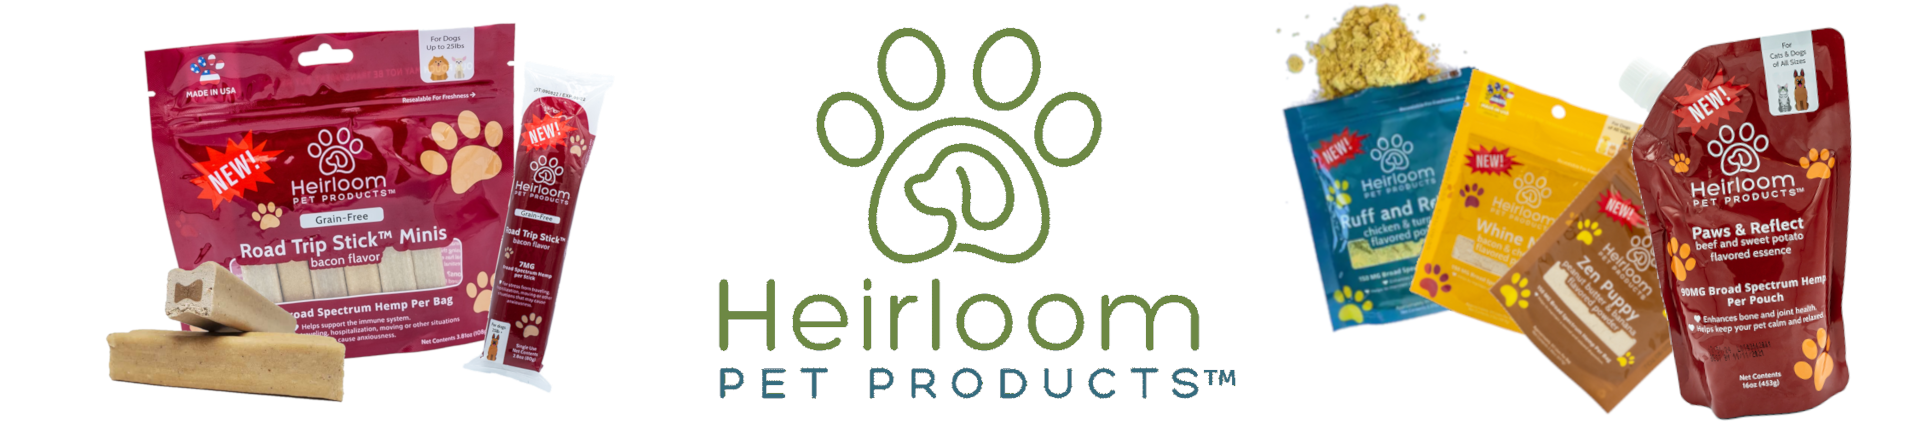 Heirloom Pet Products